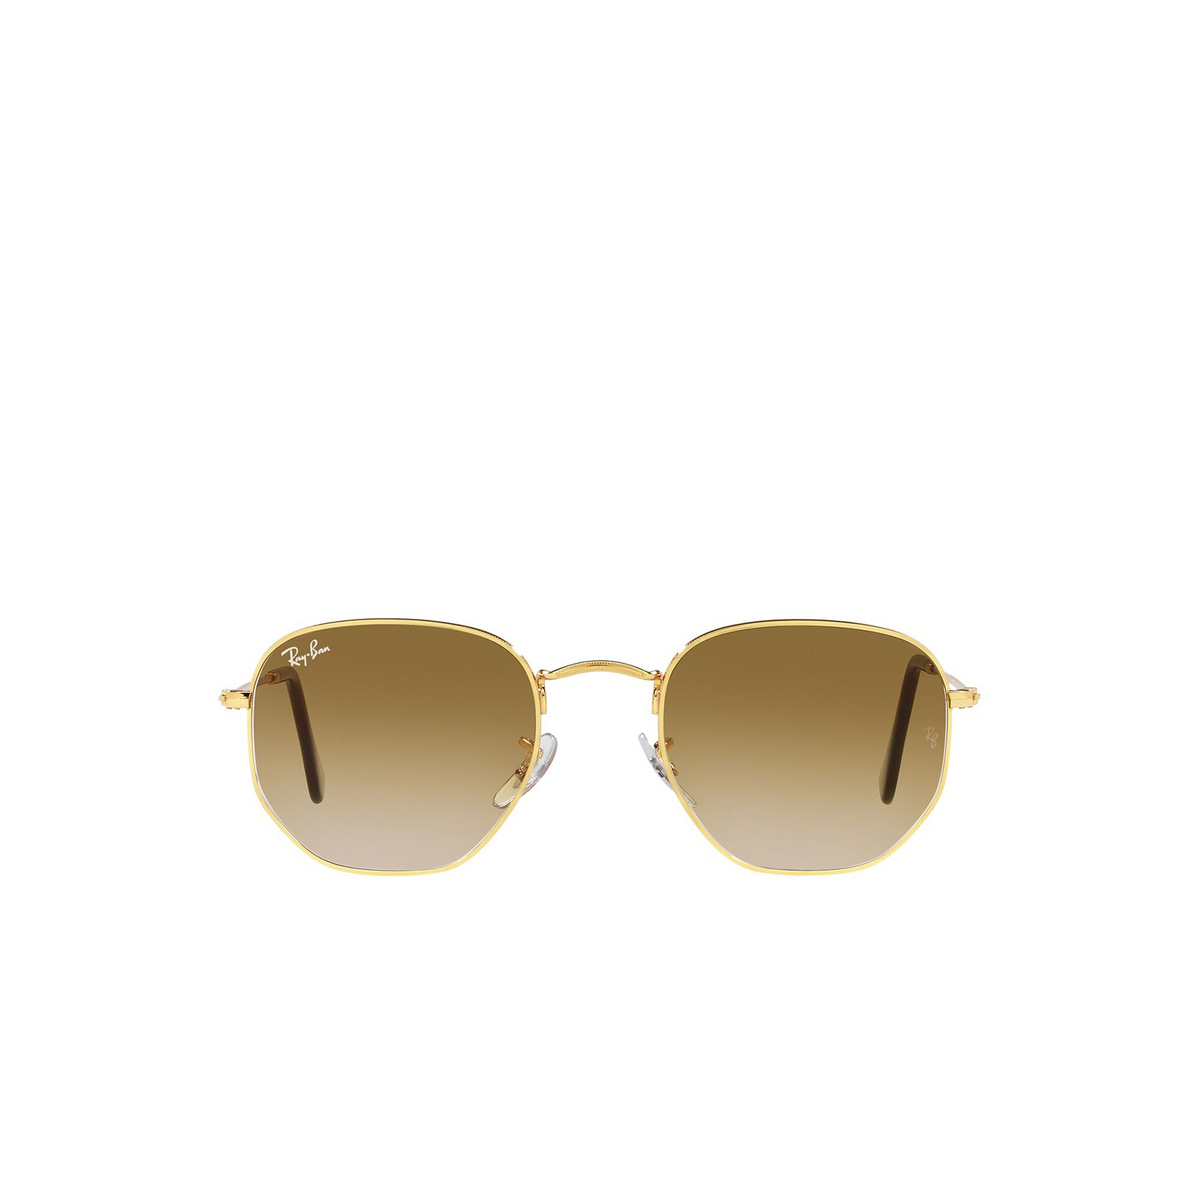 Ray-Ban RB3548 Sunglasses 001/51 Gold - front view